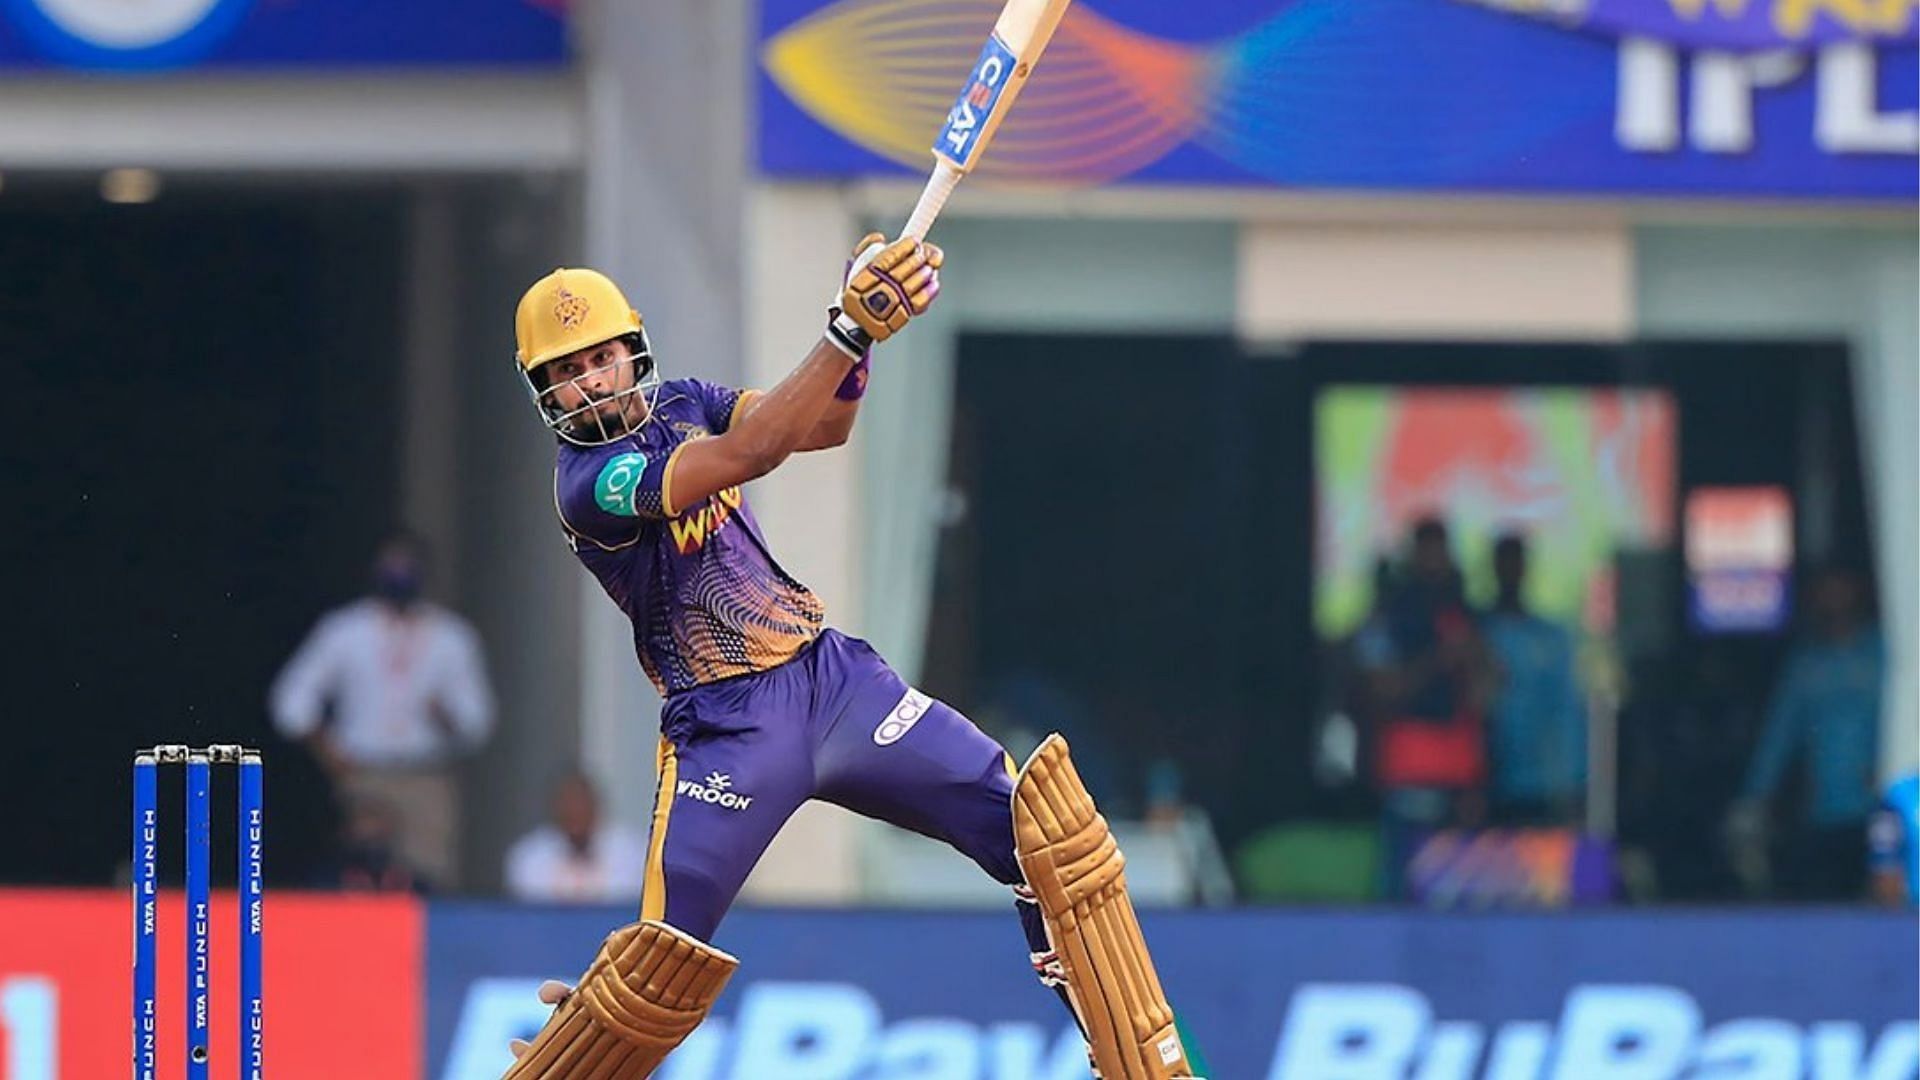 The Kolkata Knight Riders will be without Shreyas Iyer at least for the initial phase of IPL 2023. [P/C: iplt20.com]